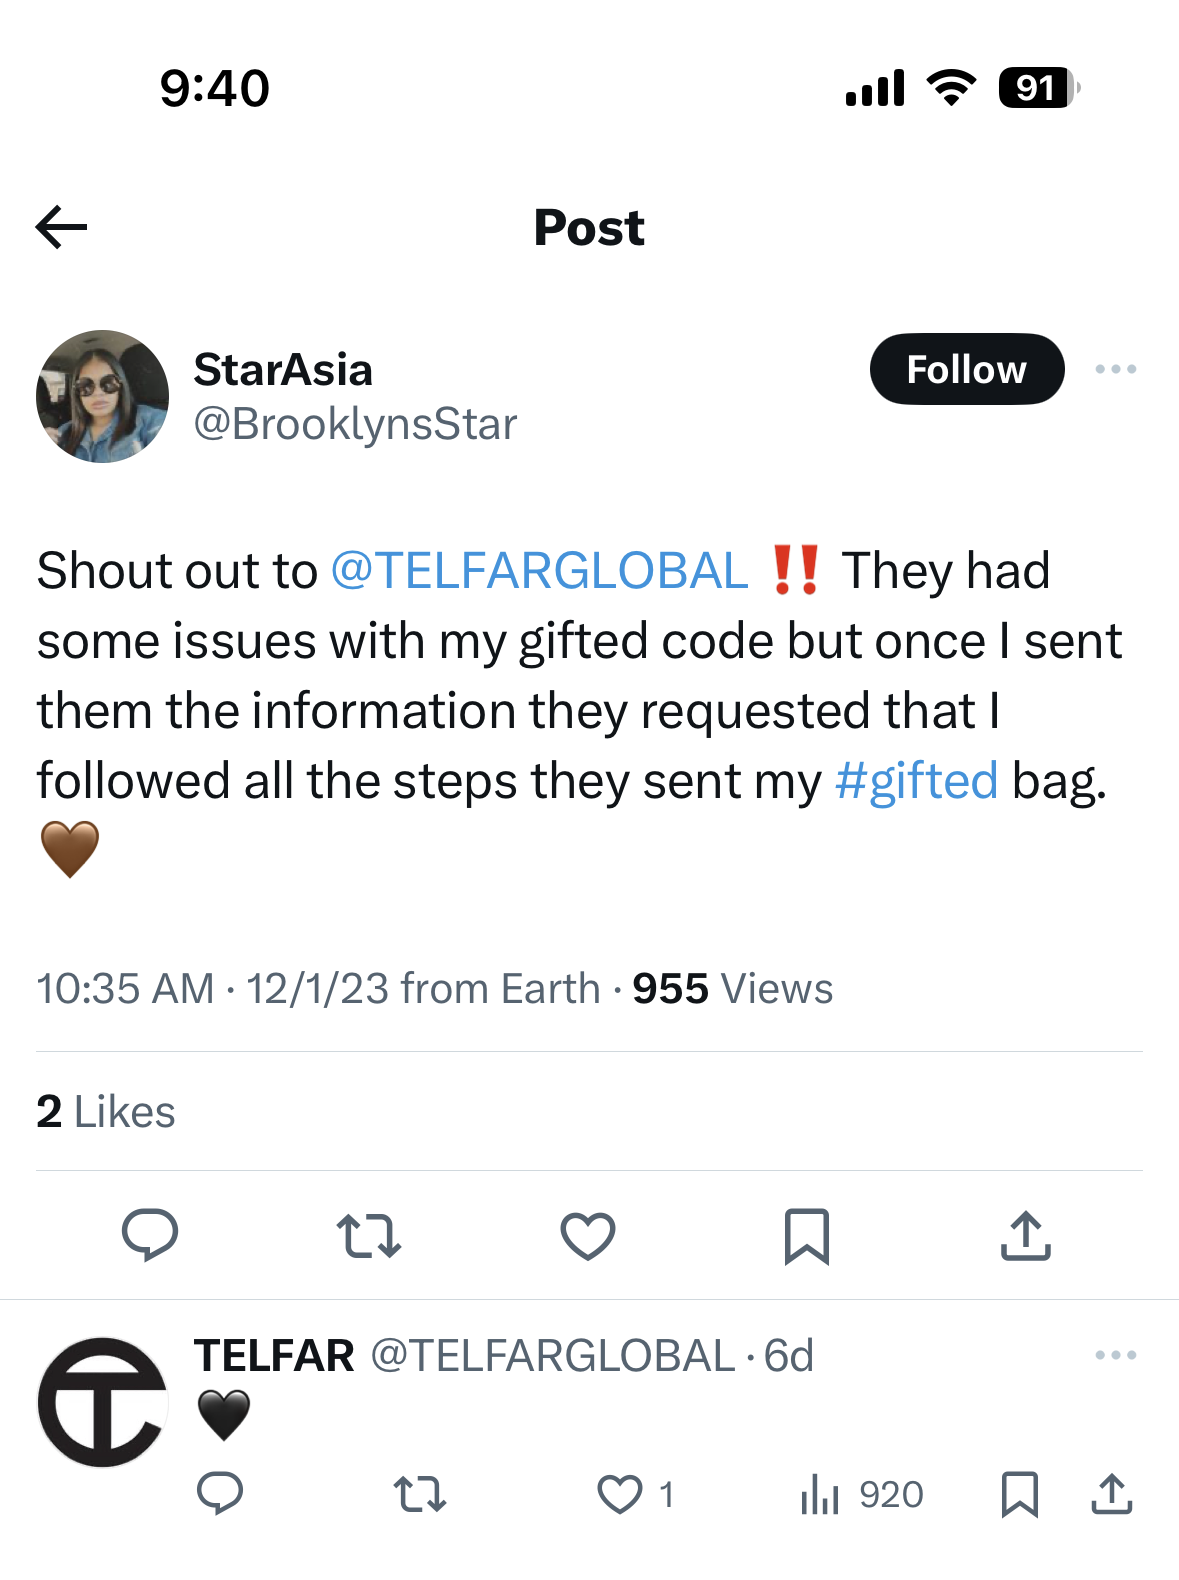 A Telfar customer thanks the brand for great customer service and rectifying an issue. The Telfar brand account responds with a black heart emoji. 